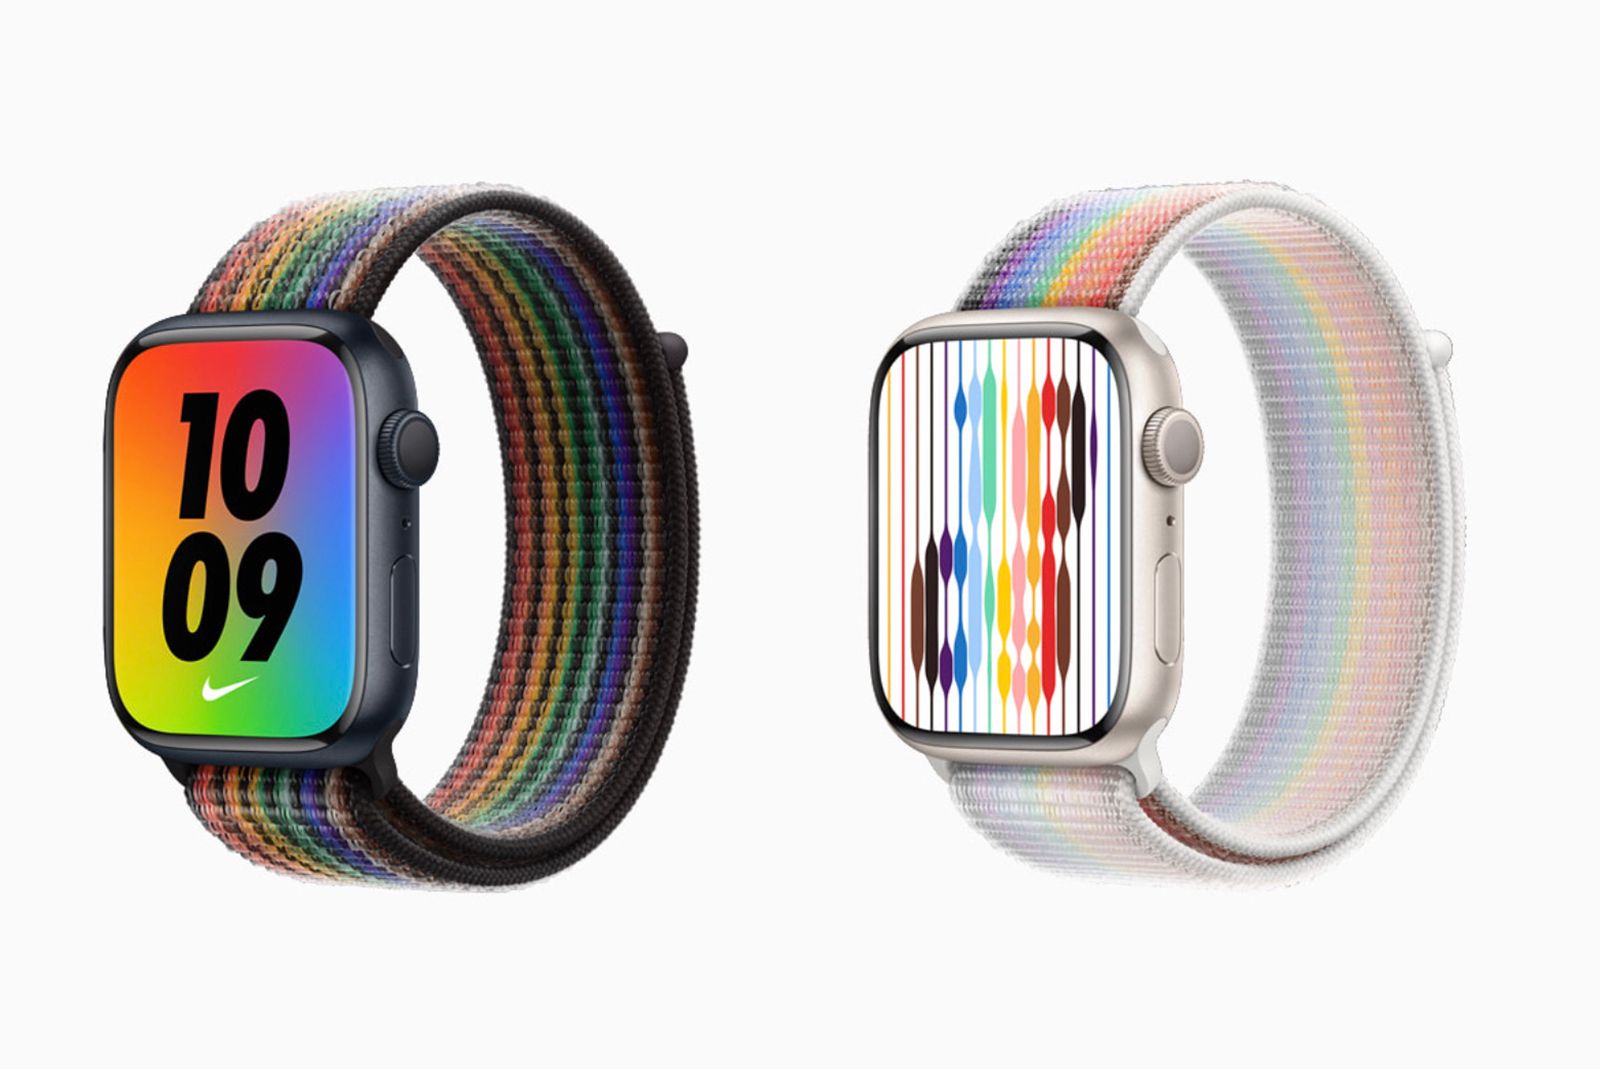 Apple celebrates Pride with rainbow Apple Watch bands and watch face photo 1